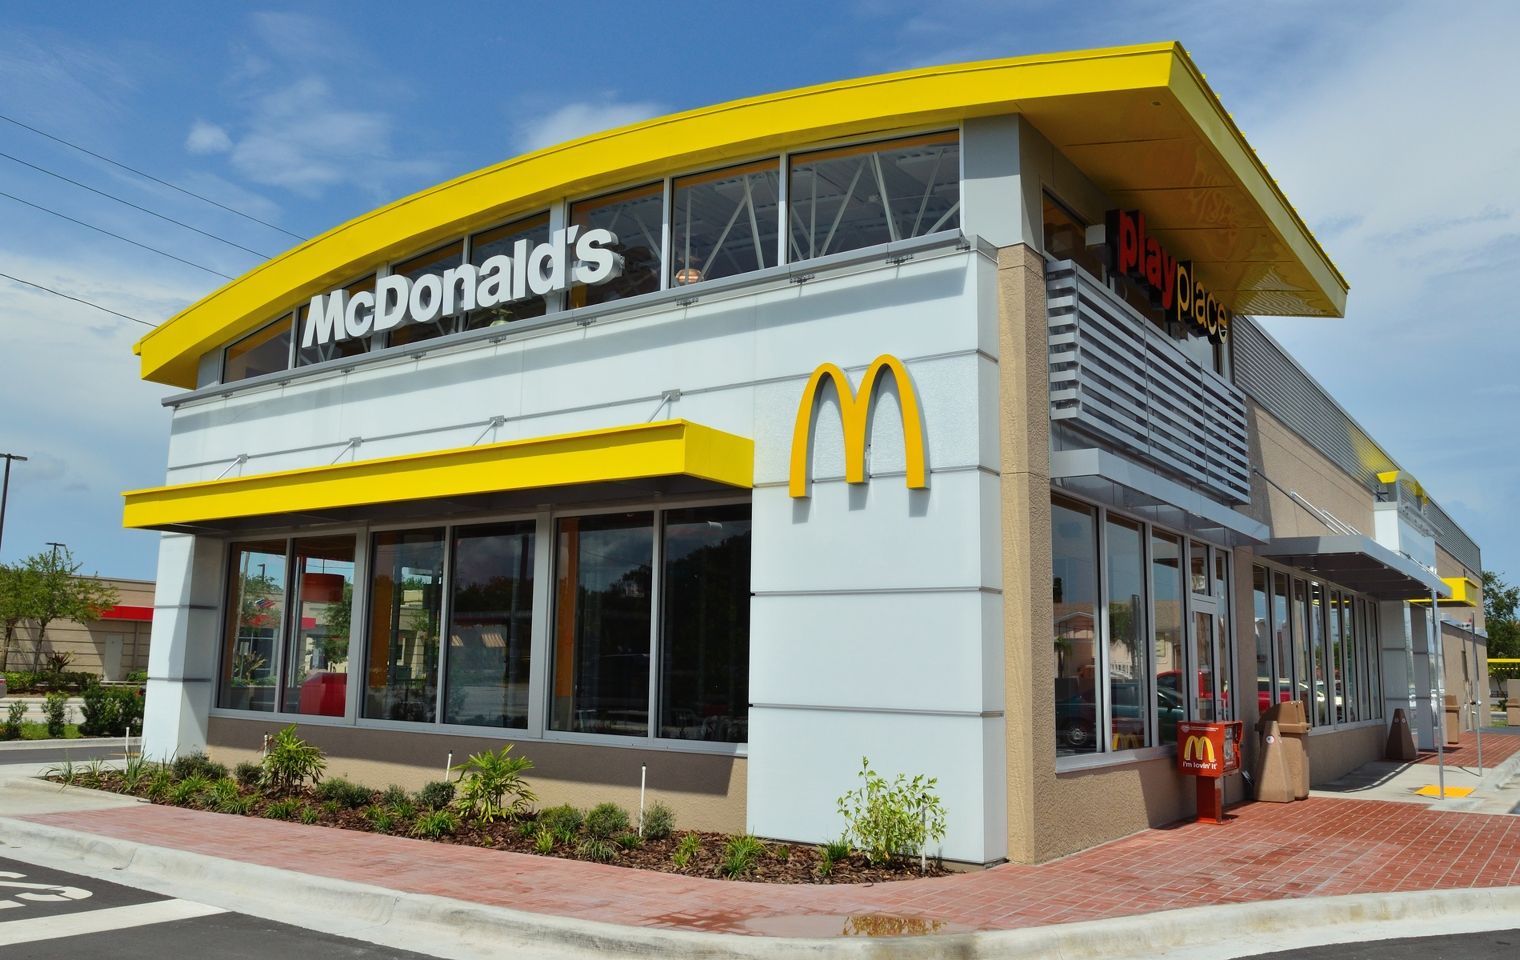 McDonald’s says it, along with local franchise operators, will invest $19 million in D.C. throughout this year and 2019 on the construction and modernization of 15 restaurants, both inside and outside. Pictured is a location in St. Petersburg, Florida. (Courtesy McDonald's)